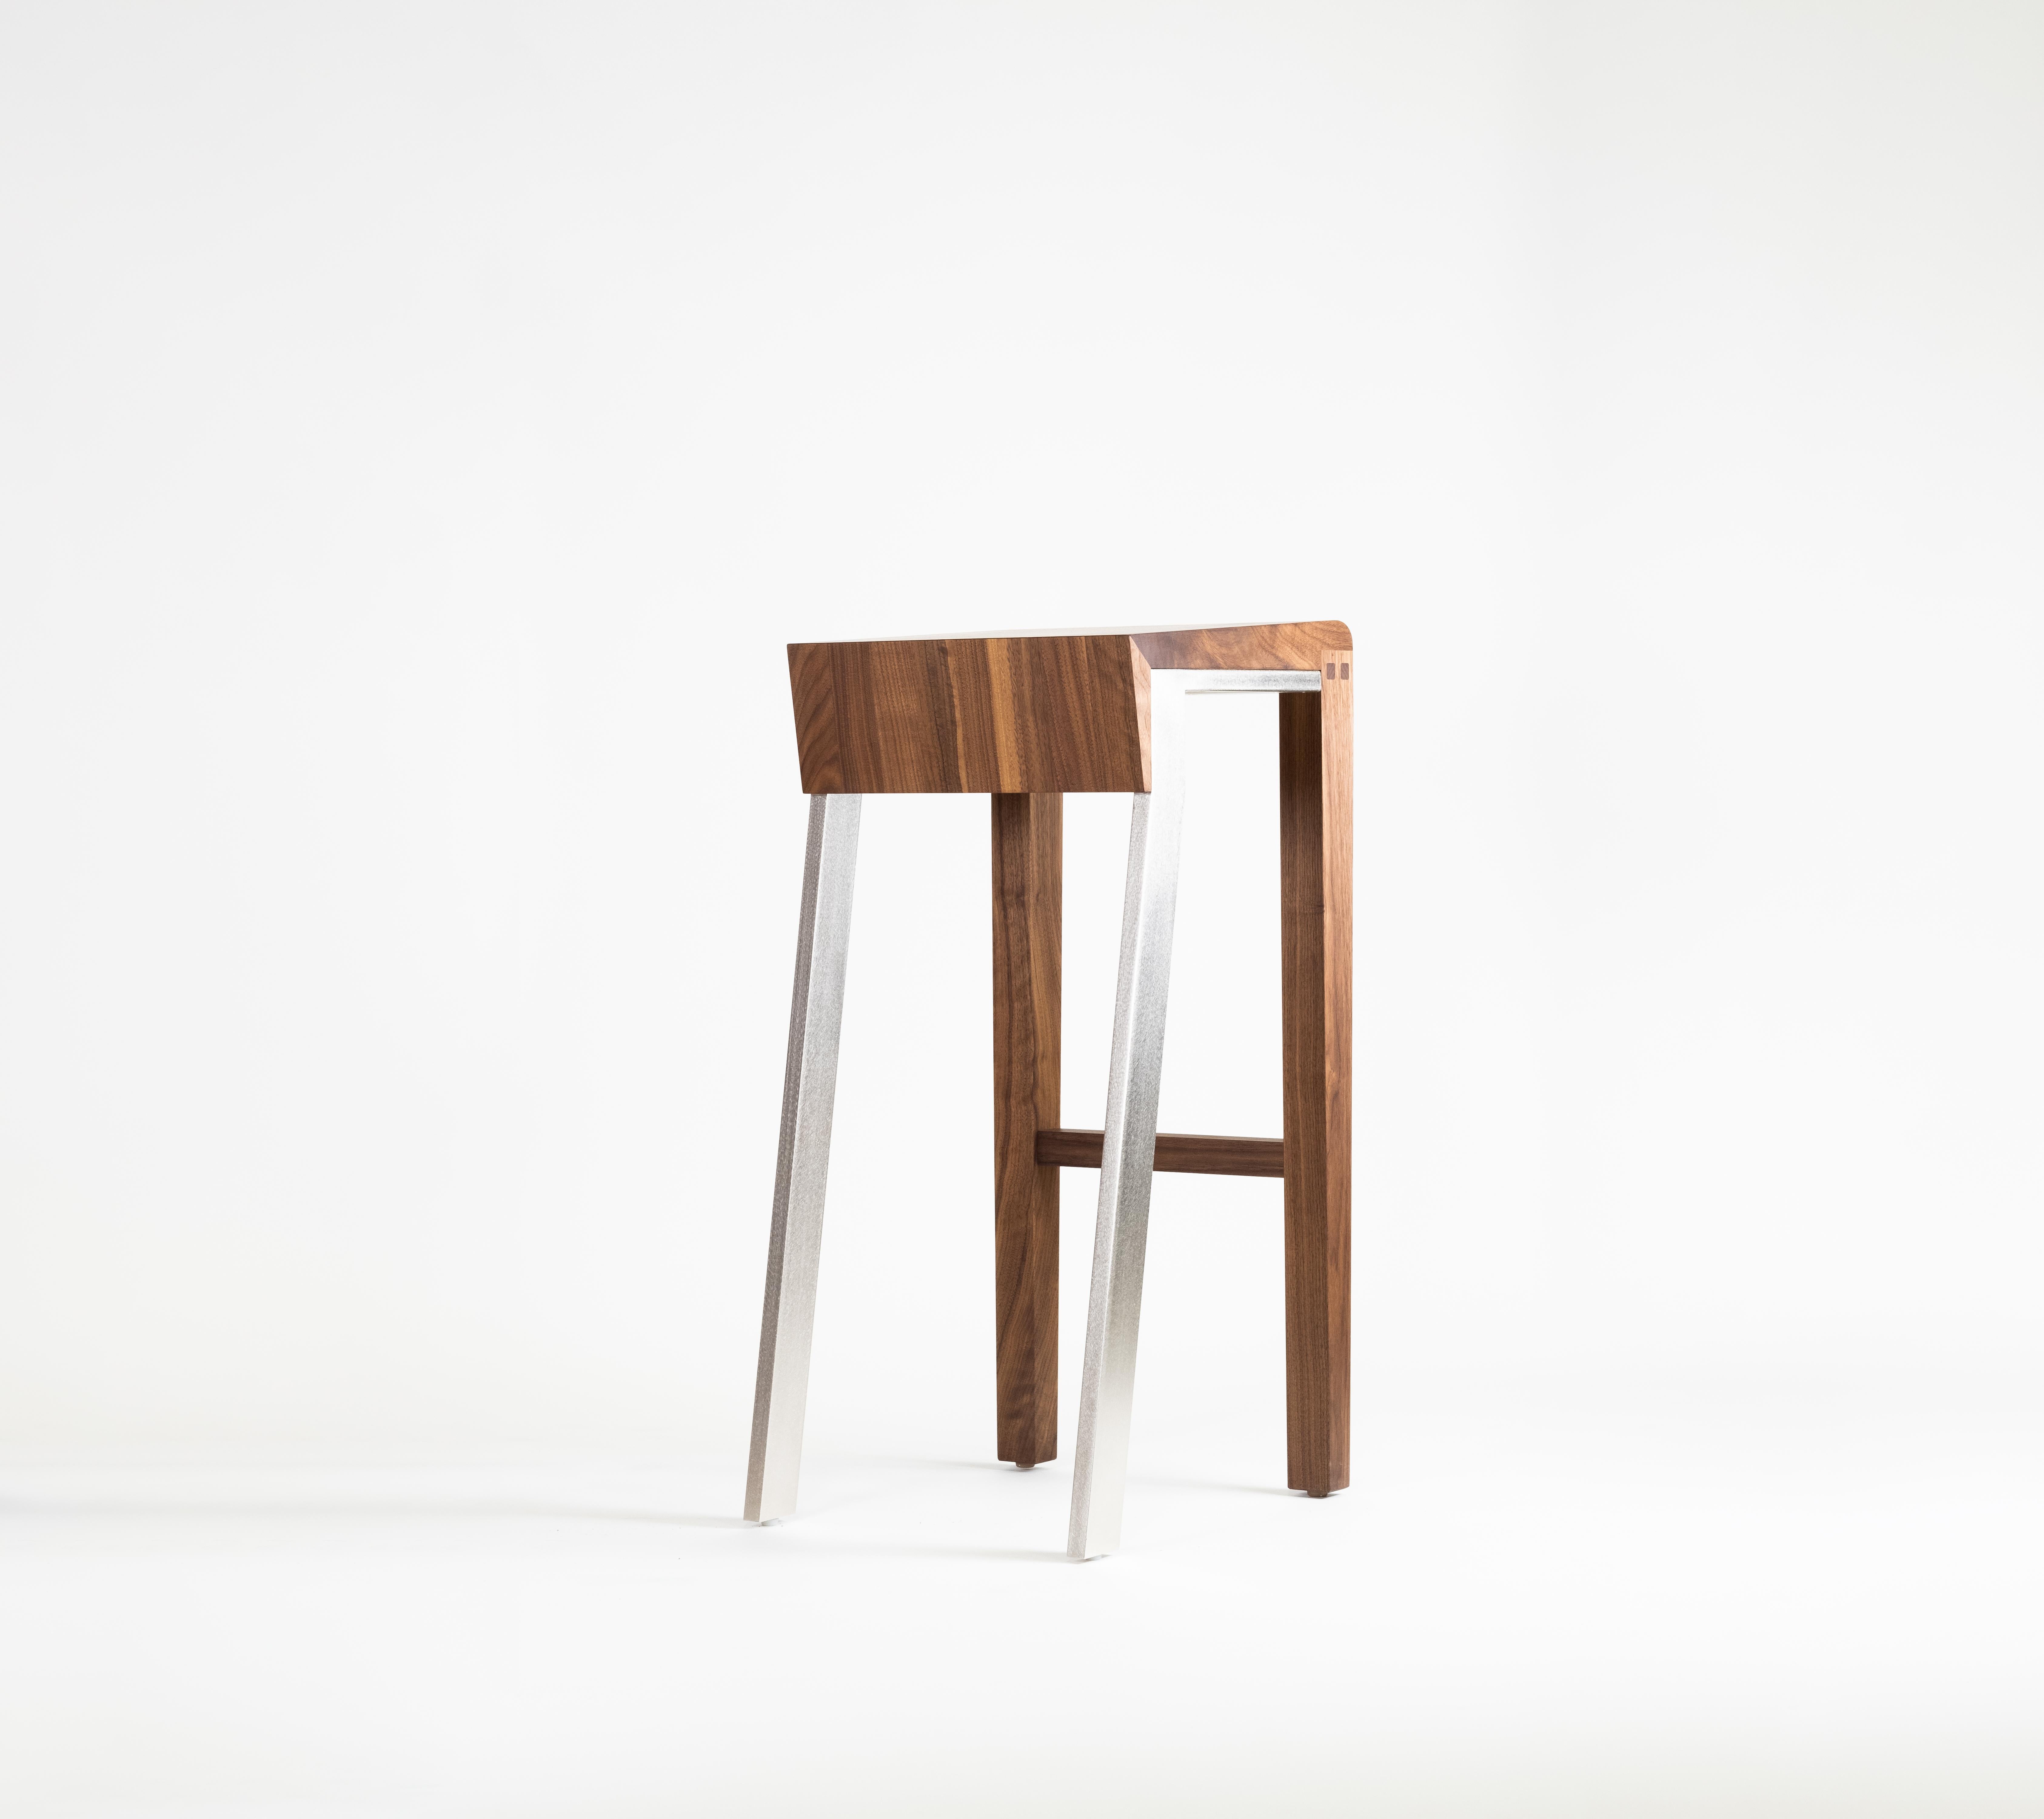 1.6 is a counter-height stool made using joined solid domestic hardwood and plated steel, featuring a combination of traditional and contemporary joinery. The slightly different appearance of each joined board generates unusual variety and gives the